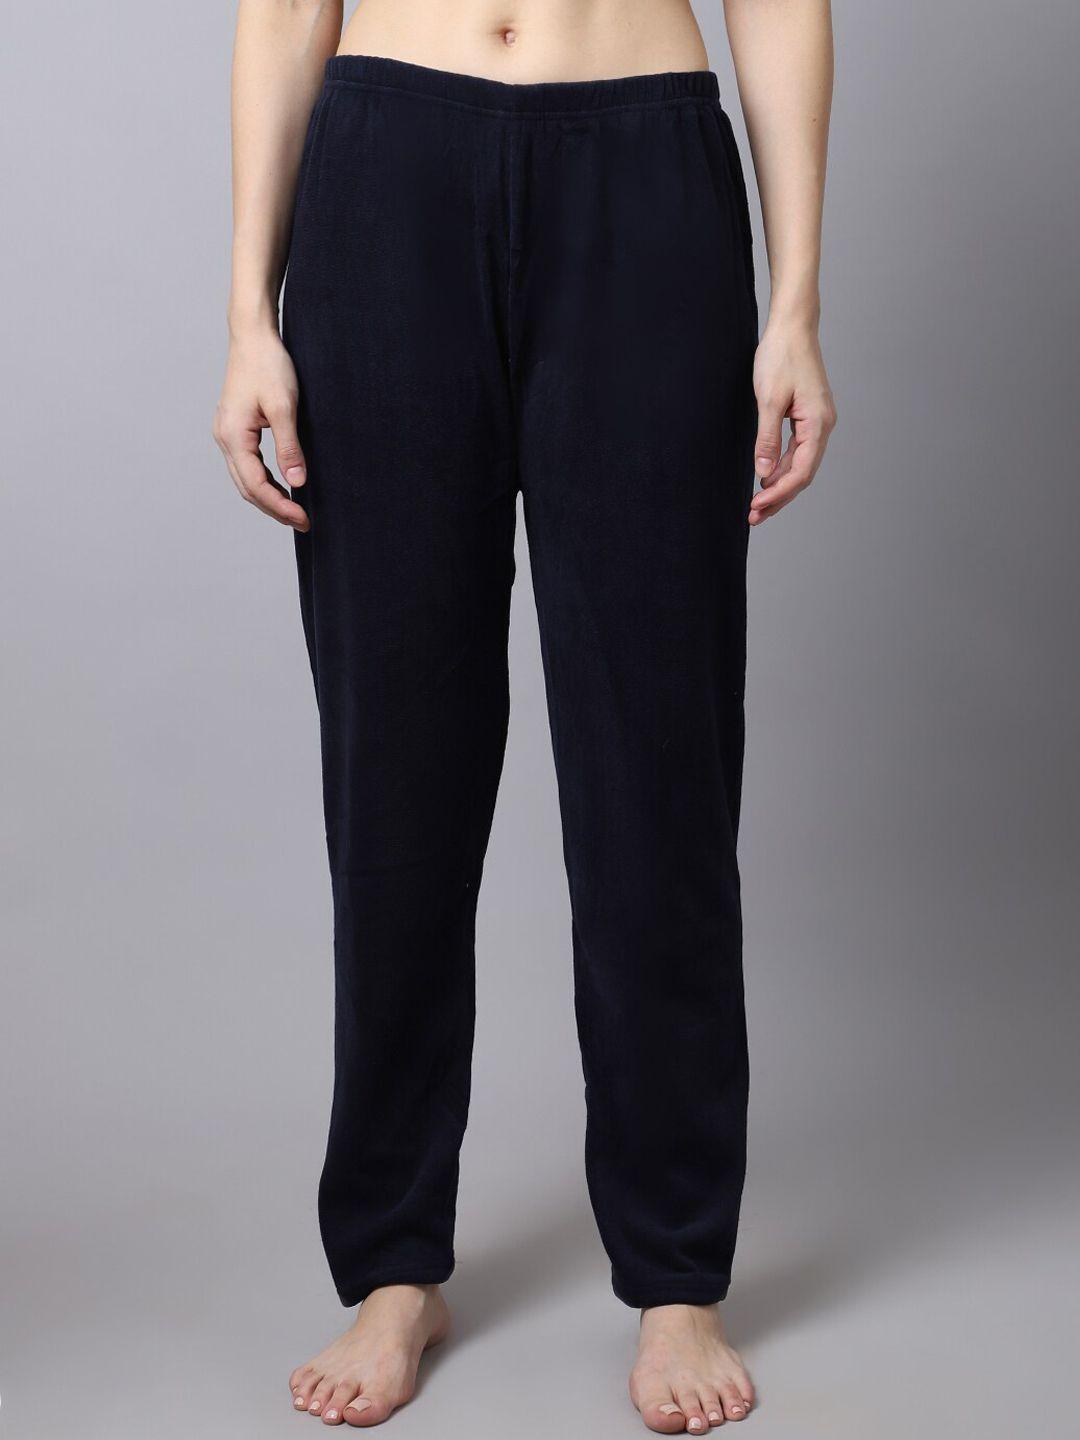 tag 7 women navy blue solid lounge pants